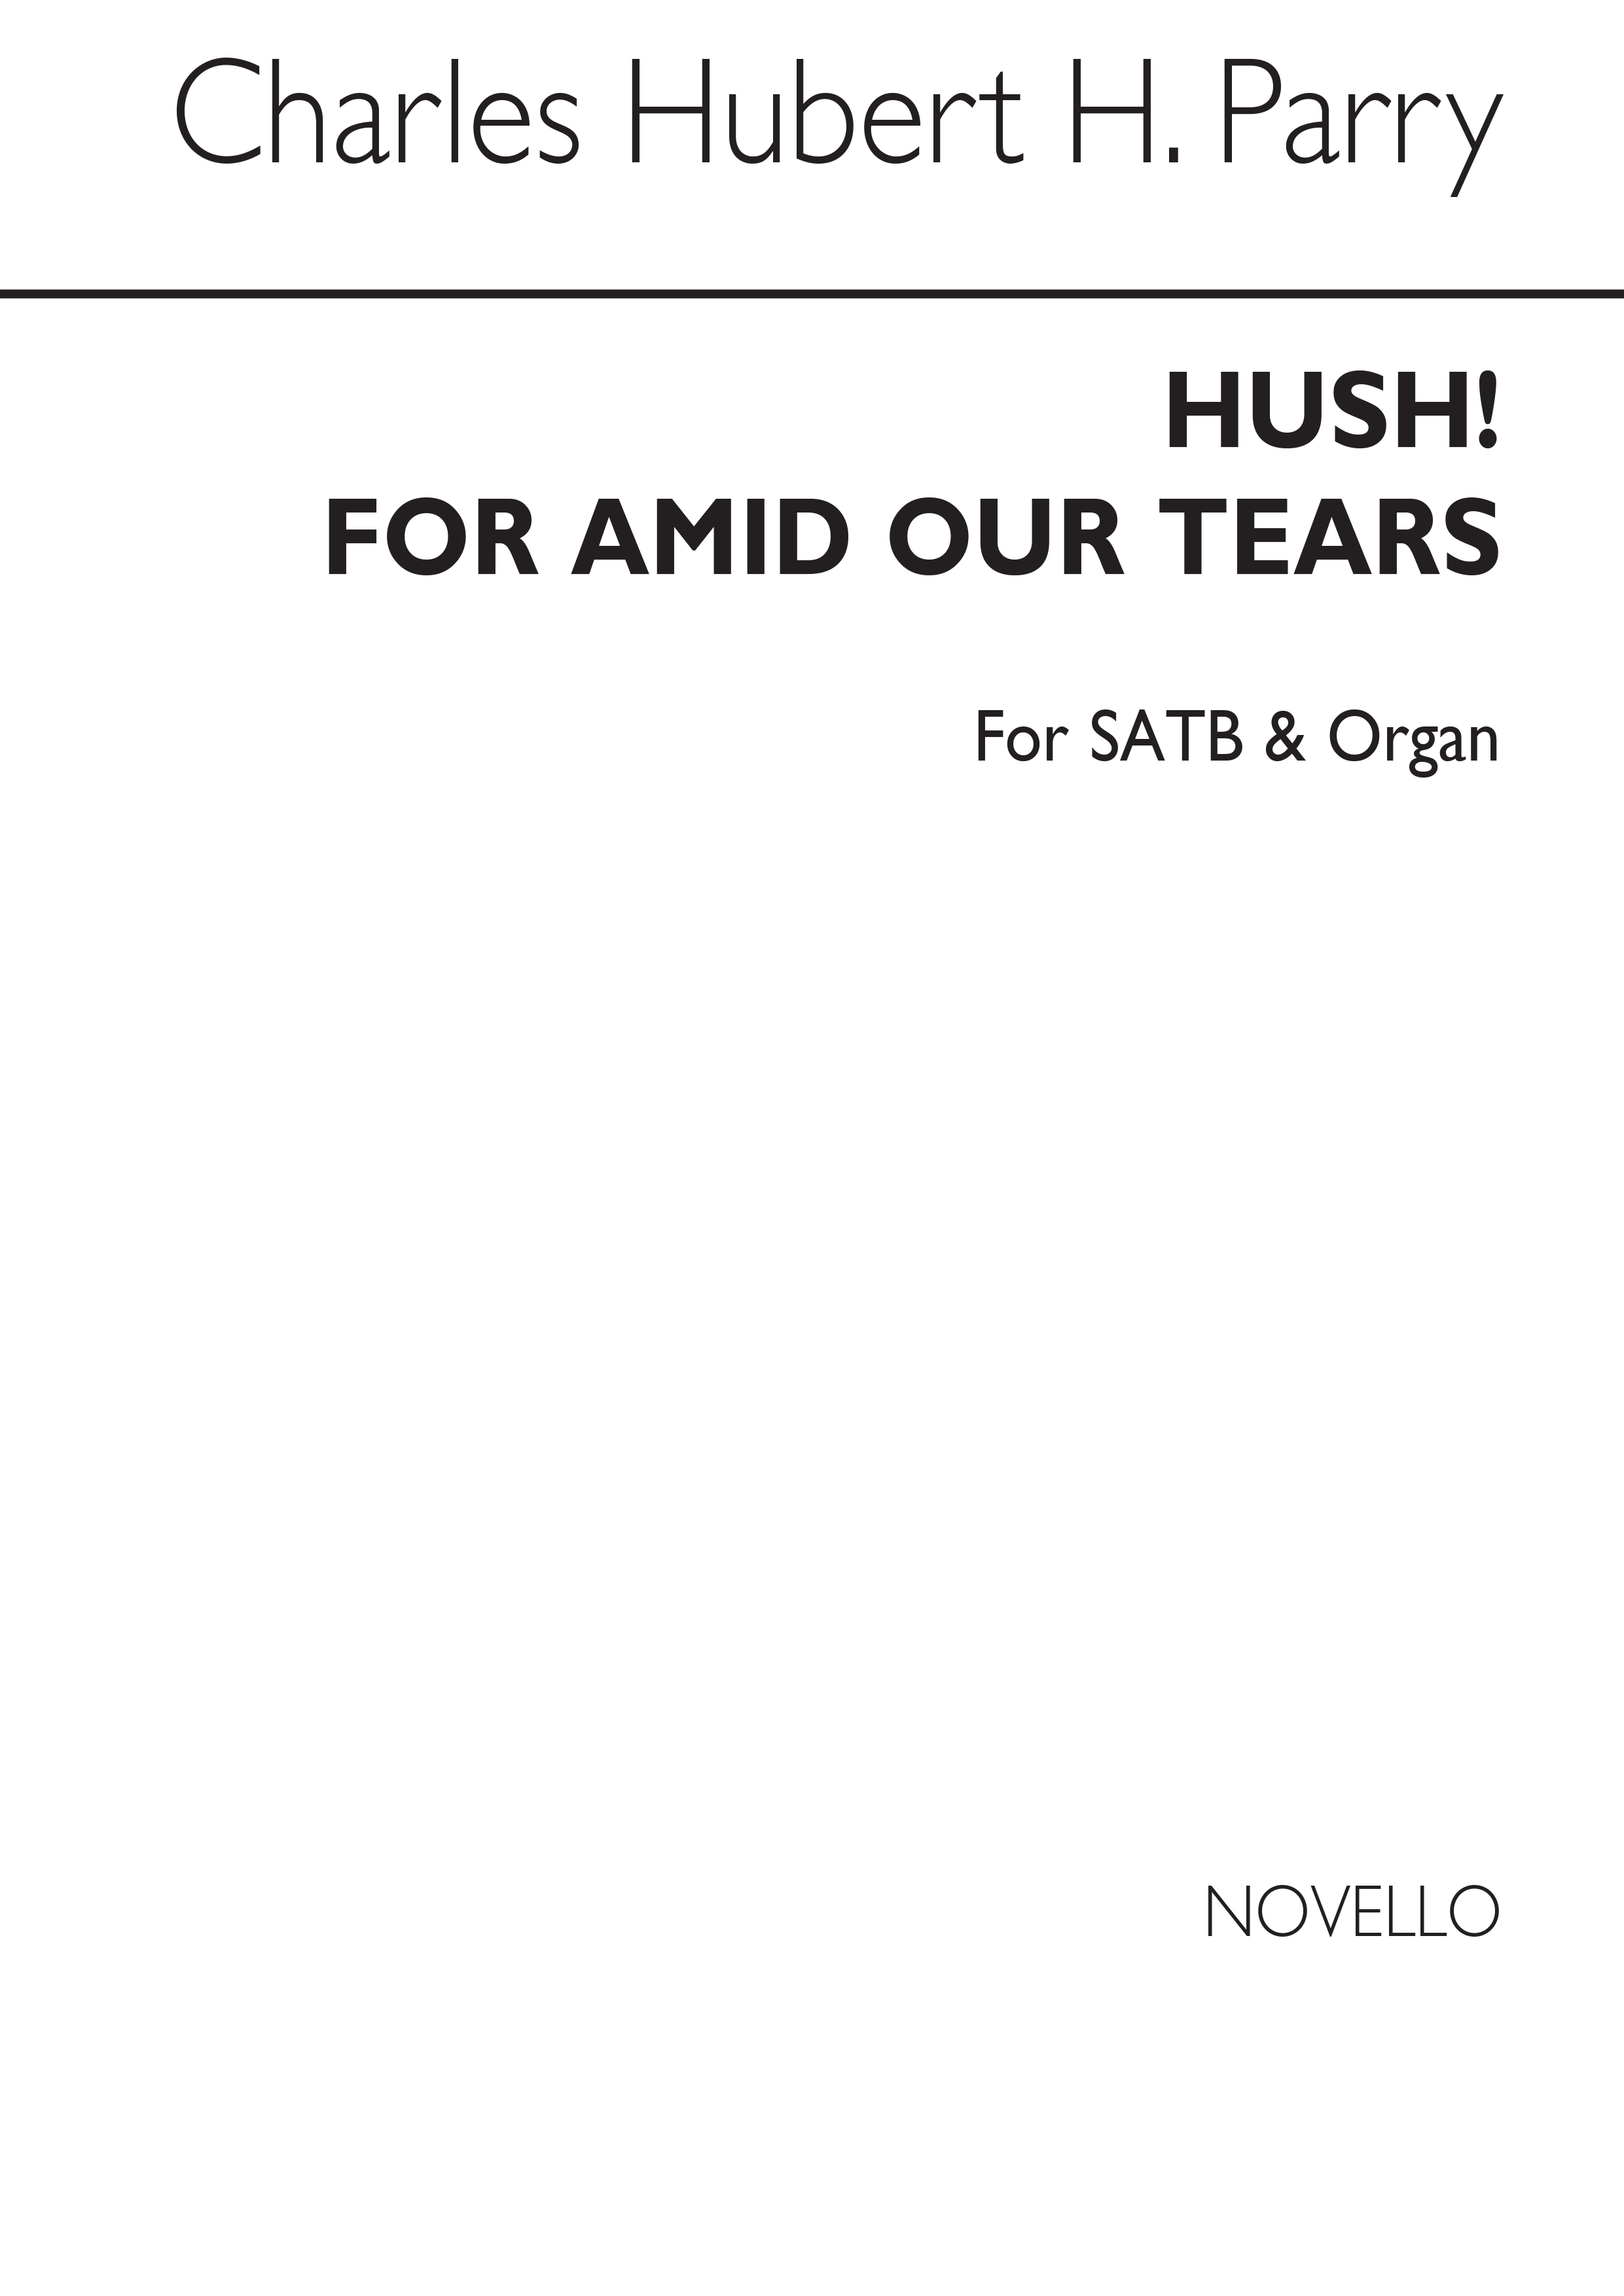 C. Hubert. H. Parry: Hush! For Amid Our Tears (Hymn) Satb/Organ